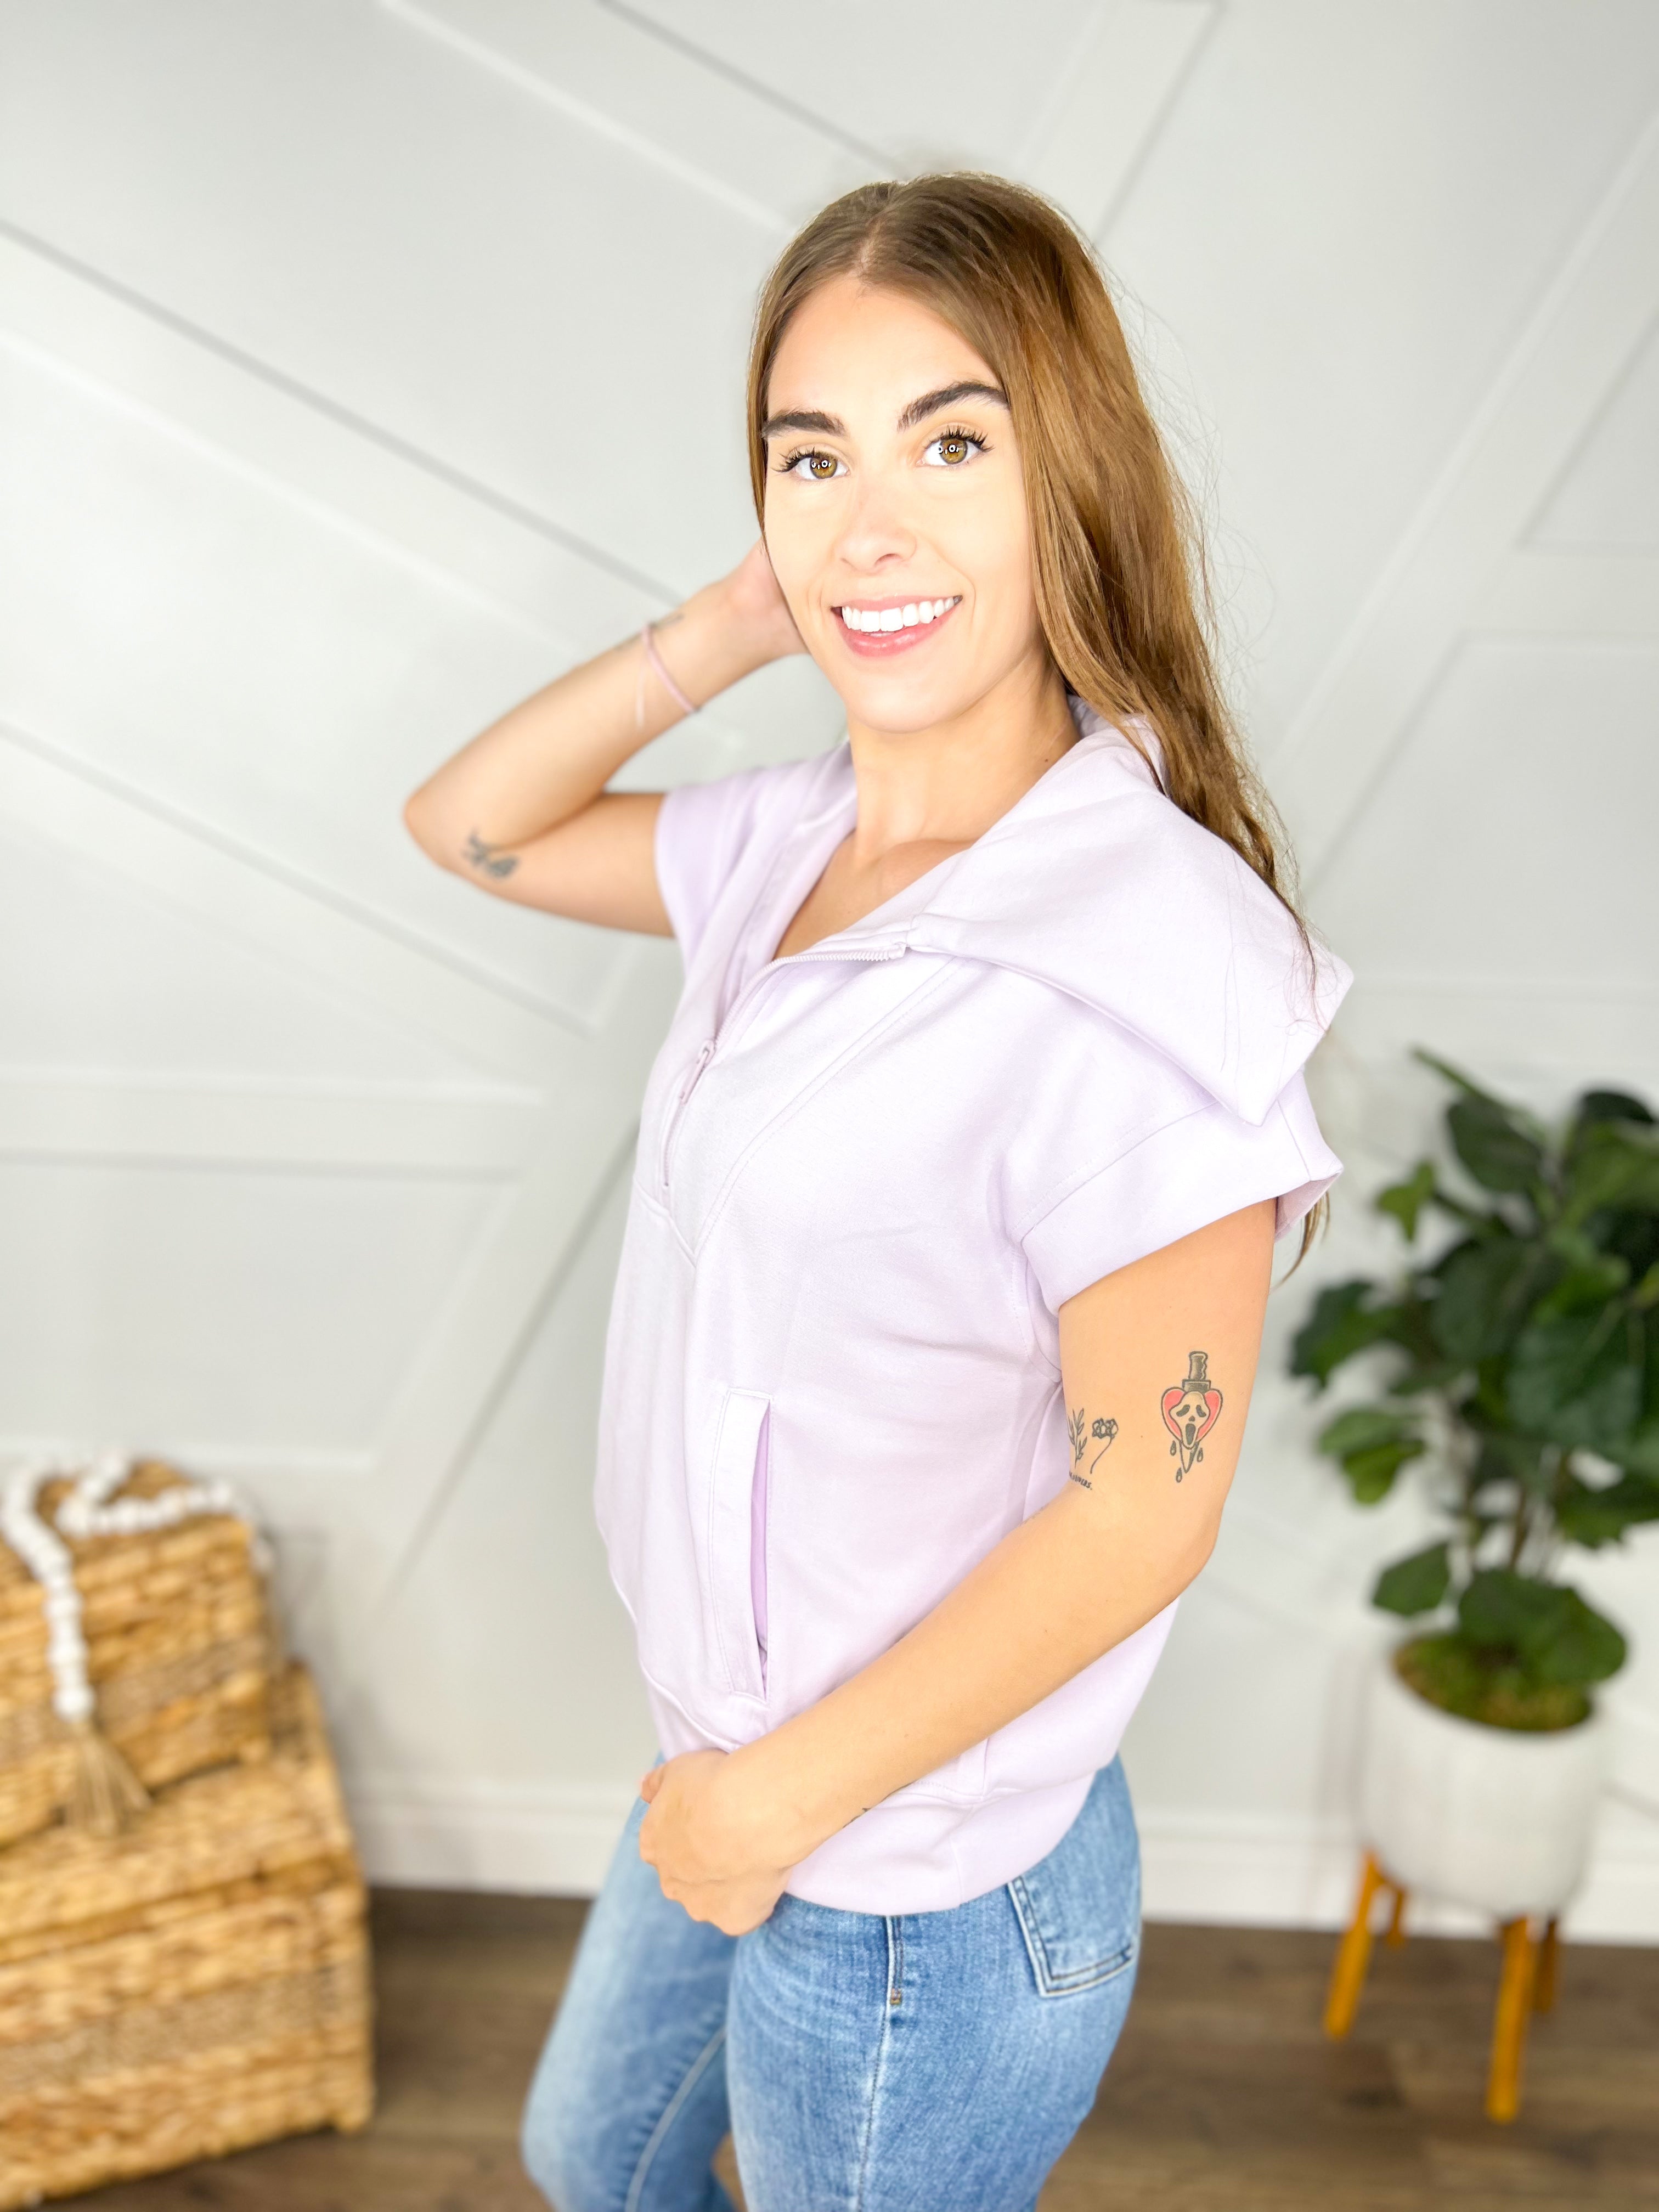 RESTOCK : Coordination Quarter Zip Top-110 Short Sleeve Top-Rae Mode-Heathered Boho Boutique, Women's Fashion and Accessories in Palmetto, FL